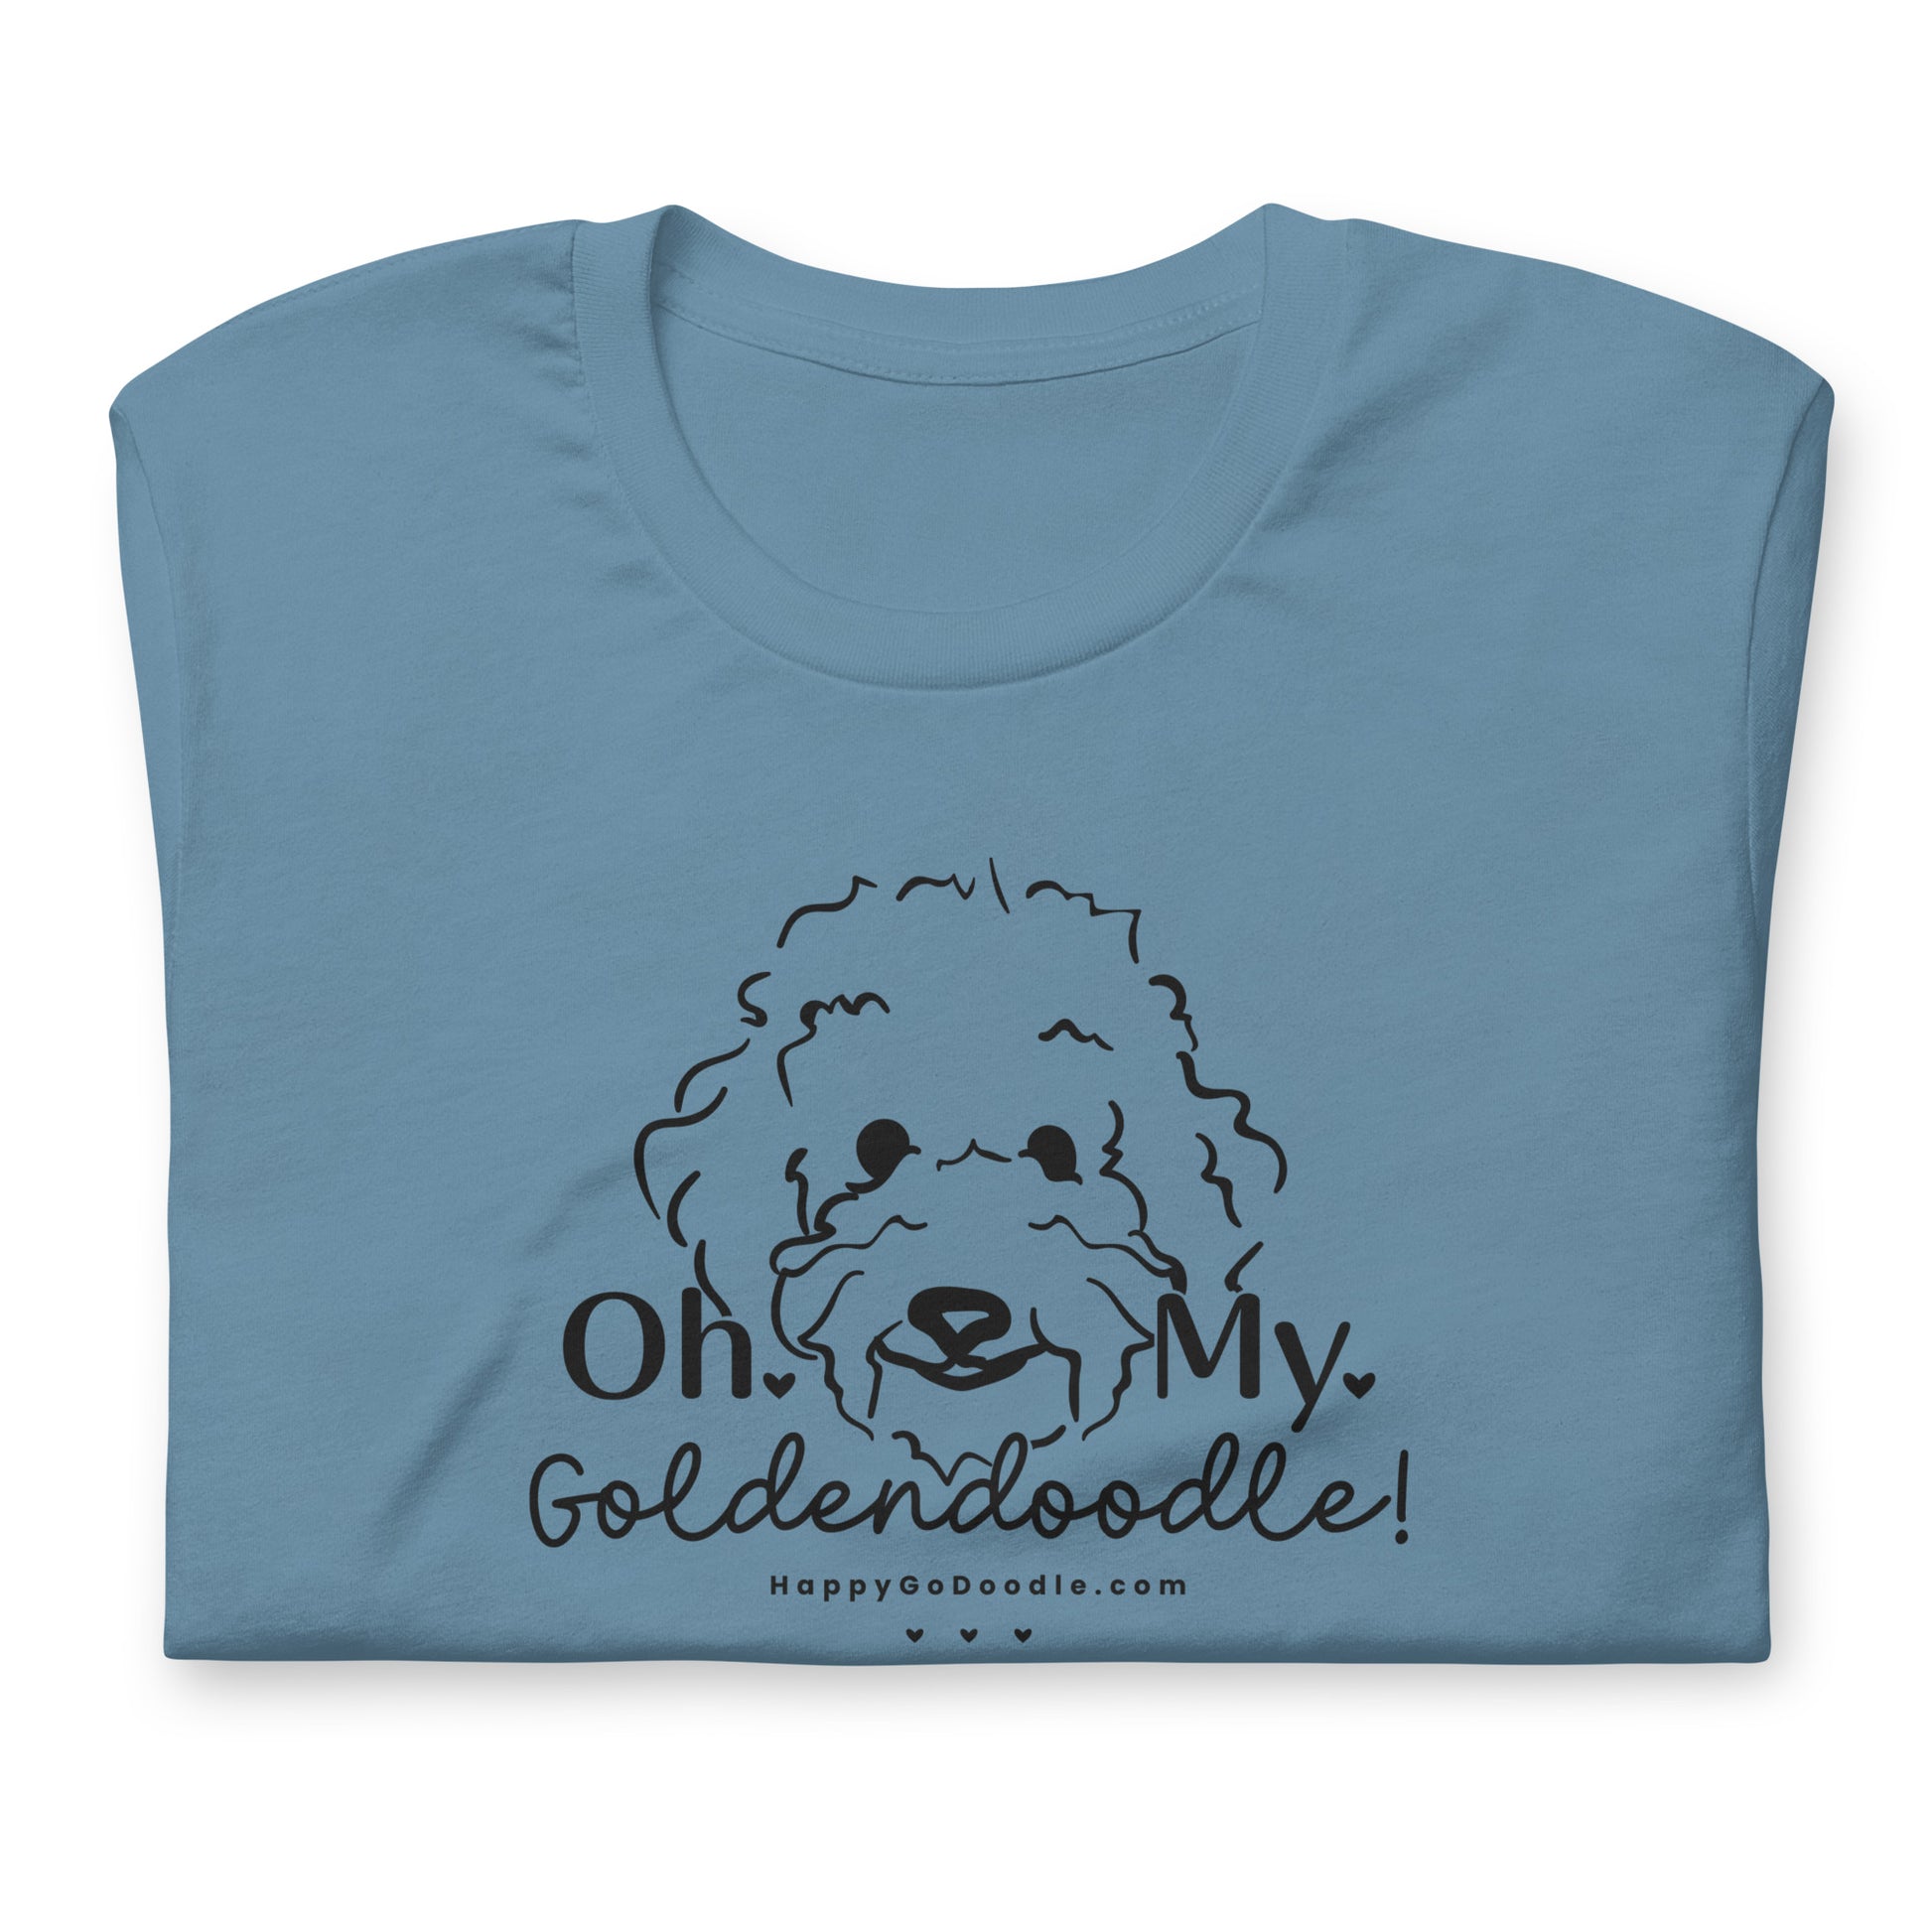 Goldendoodle t-shirt with Goldendoodle face and words "Oh My Goldendoodle" in steel blue color